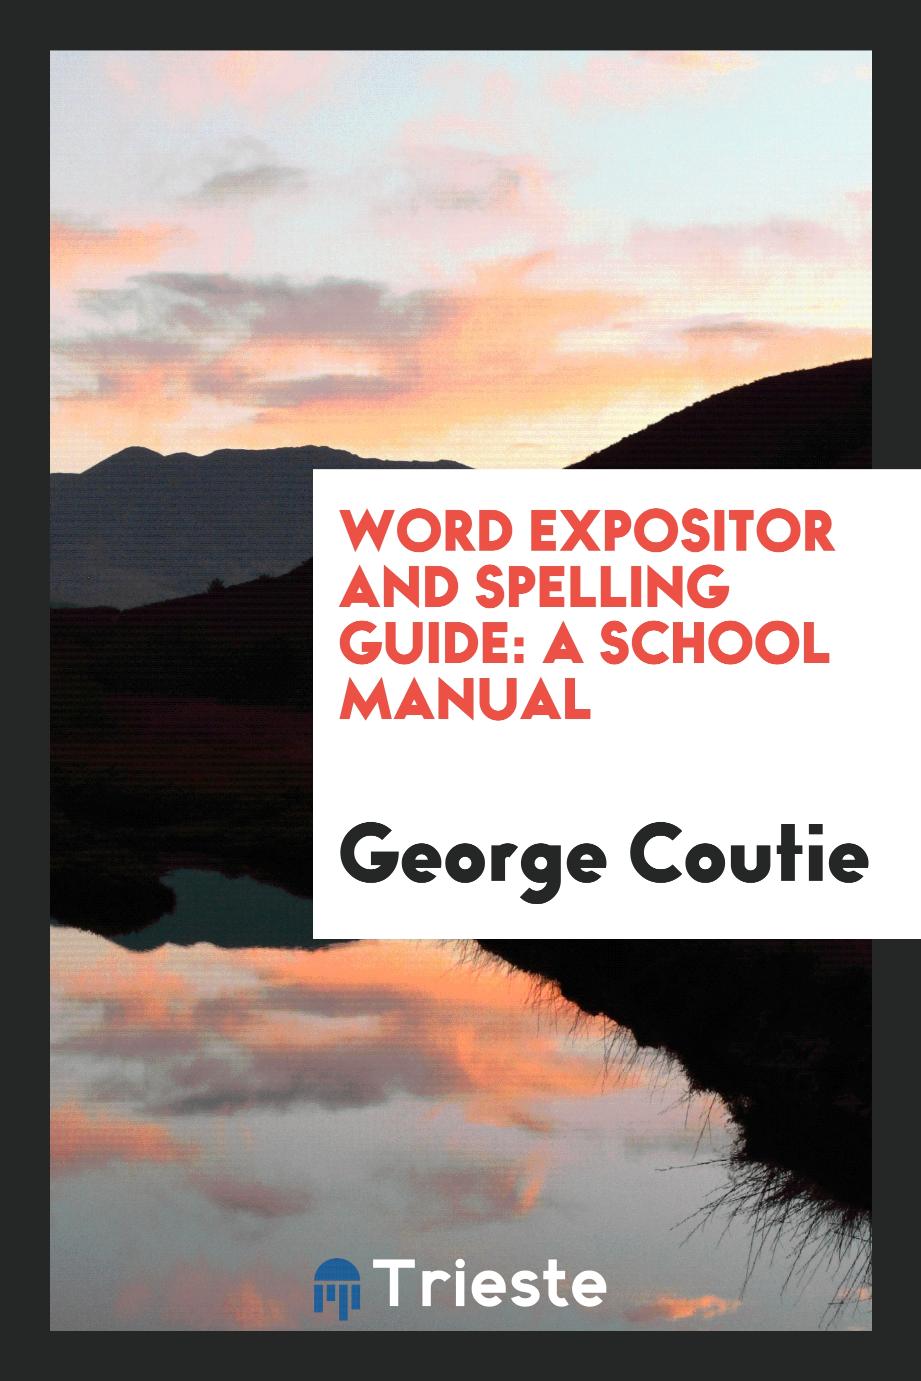 Word Expositor and Spelling Guide: A School Manual